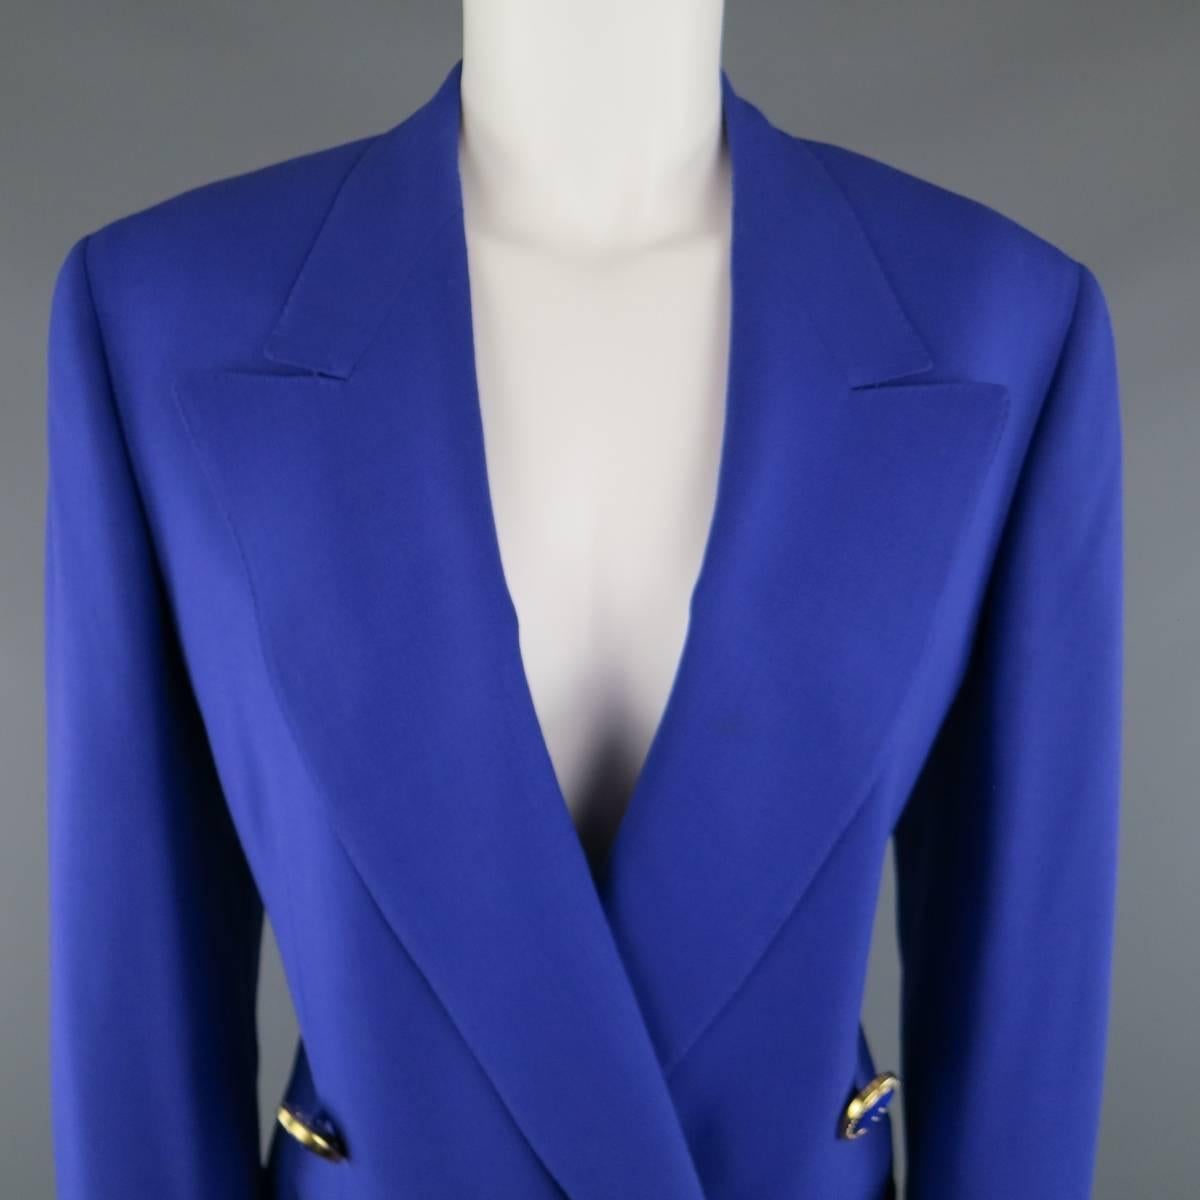 Vintage 1980's GIANNI VERSACE COUTURE skirt suit comes in a vibrant purple wool material and includes a double breasted, peak lapel, blazer with gold tone statement buttons and a matching A line pencil skirt. Made in Italy.
 
Excellent Pre-Owned